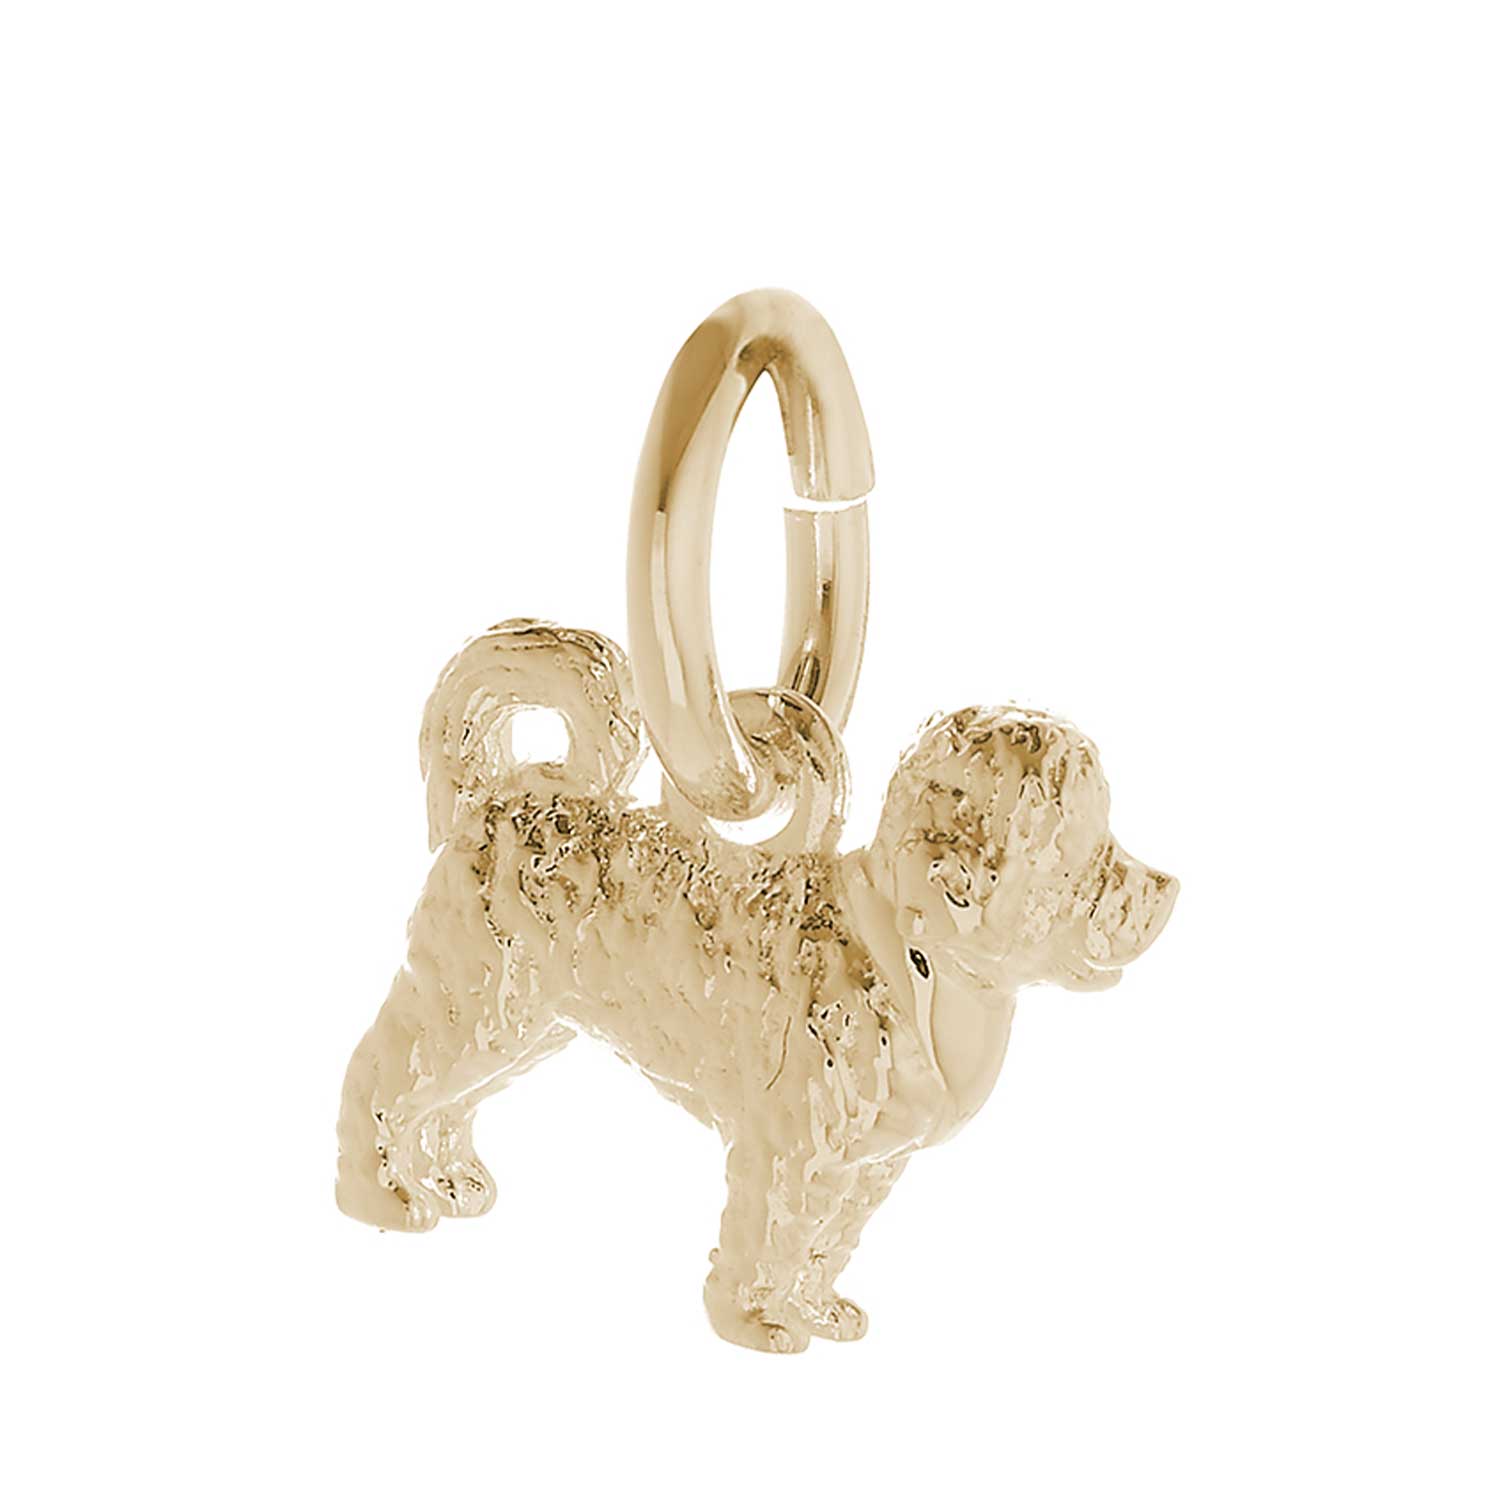 Solid 9ct gold Cavapoo charm with tiny bandana (optional), perfect for a charm bracelet or necklace.